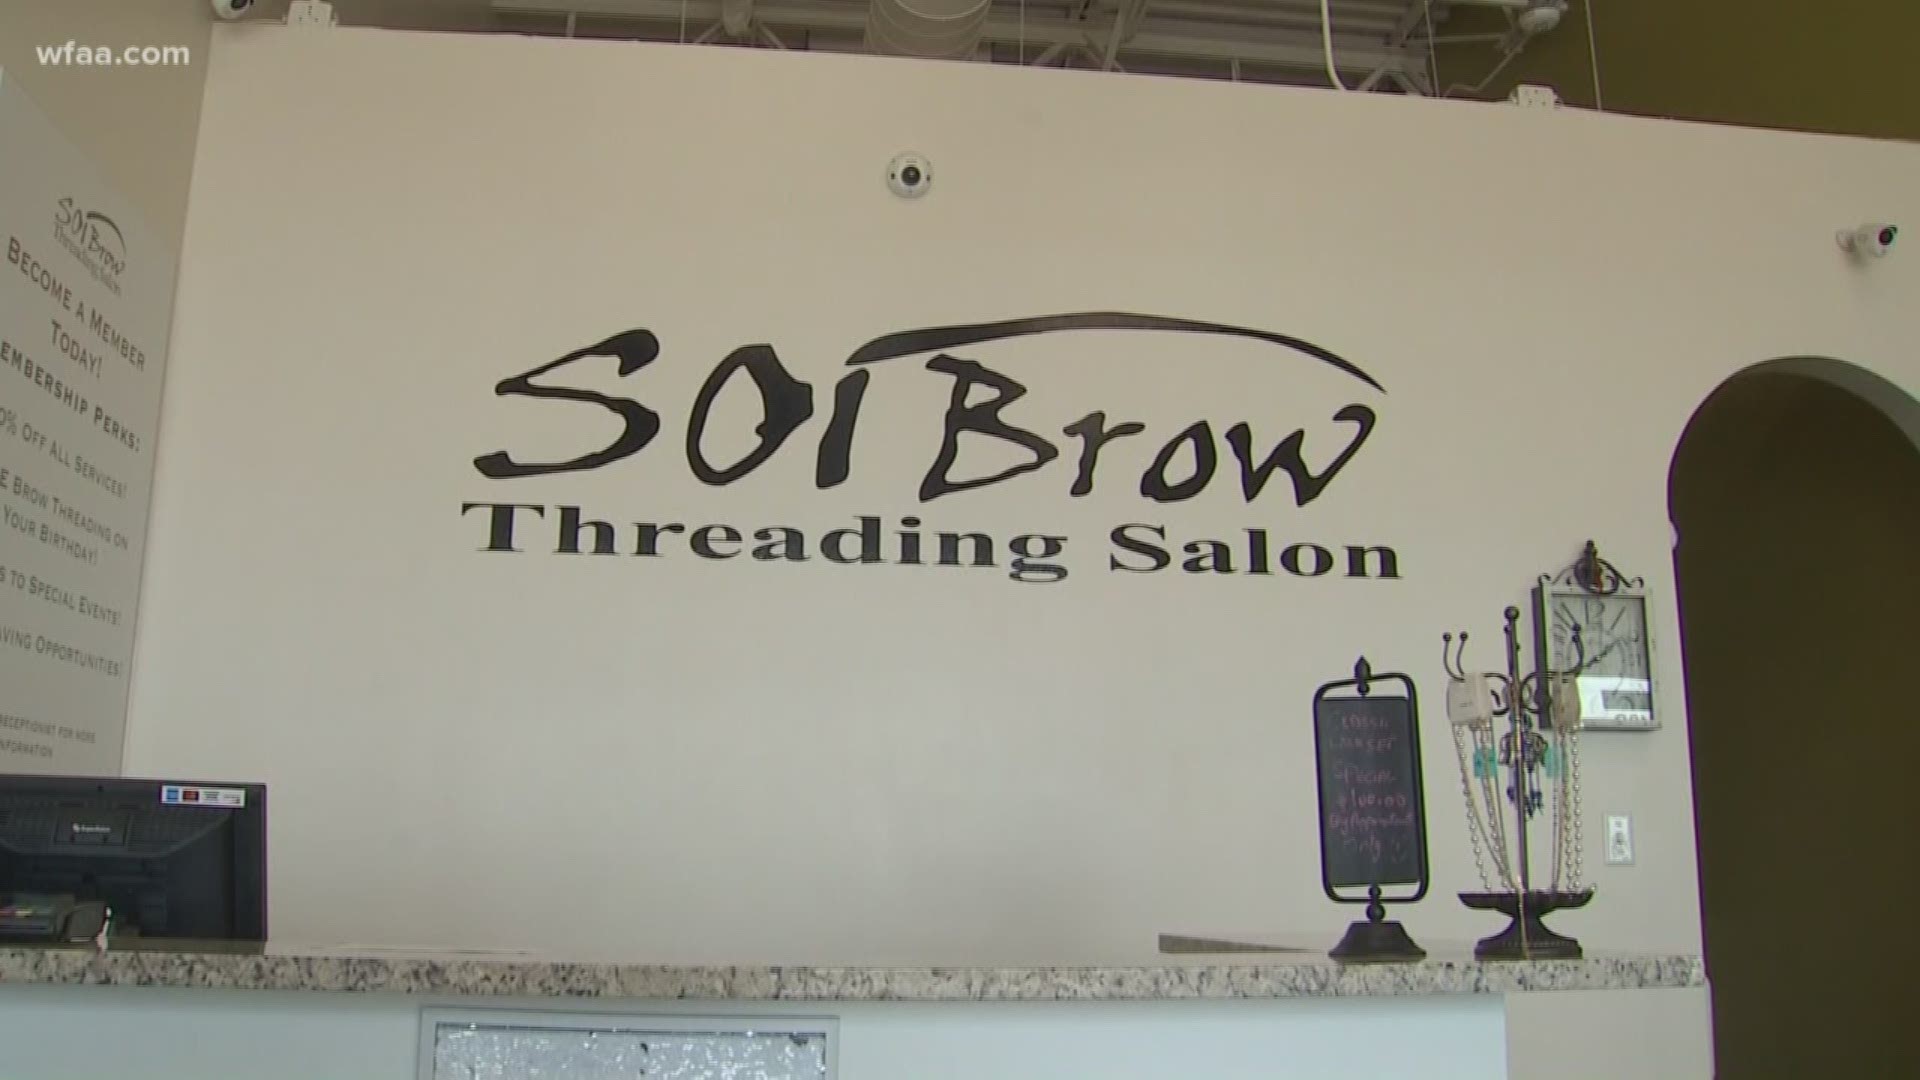 Employees say the woman has hit their salons in Midlothian, Mansfield, Irving, Waxahachie and Waco. Now, they are warning customers to beware so they don’t become a victim of theft.